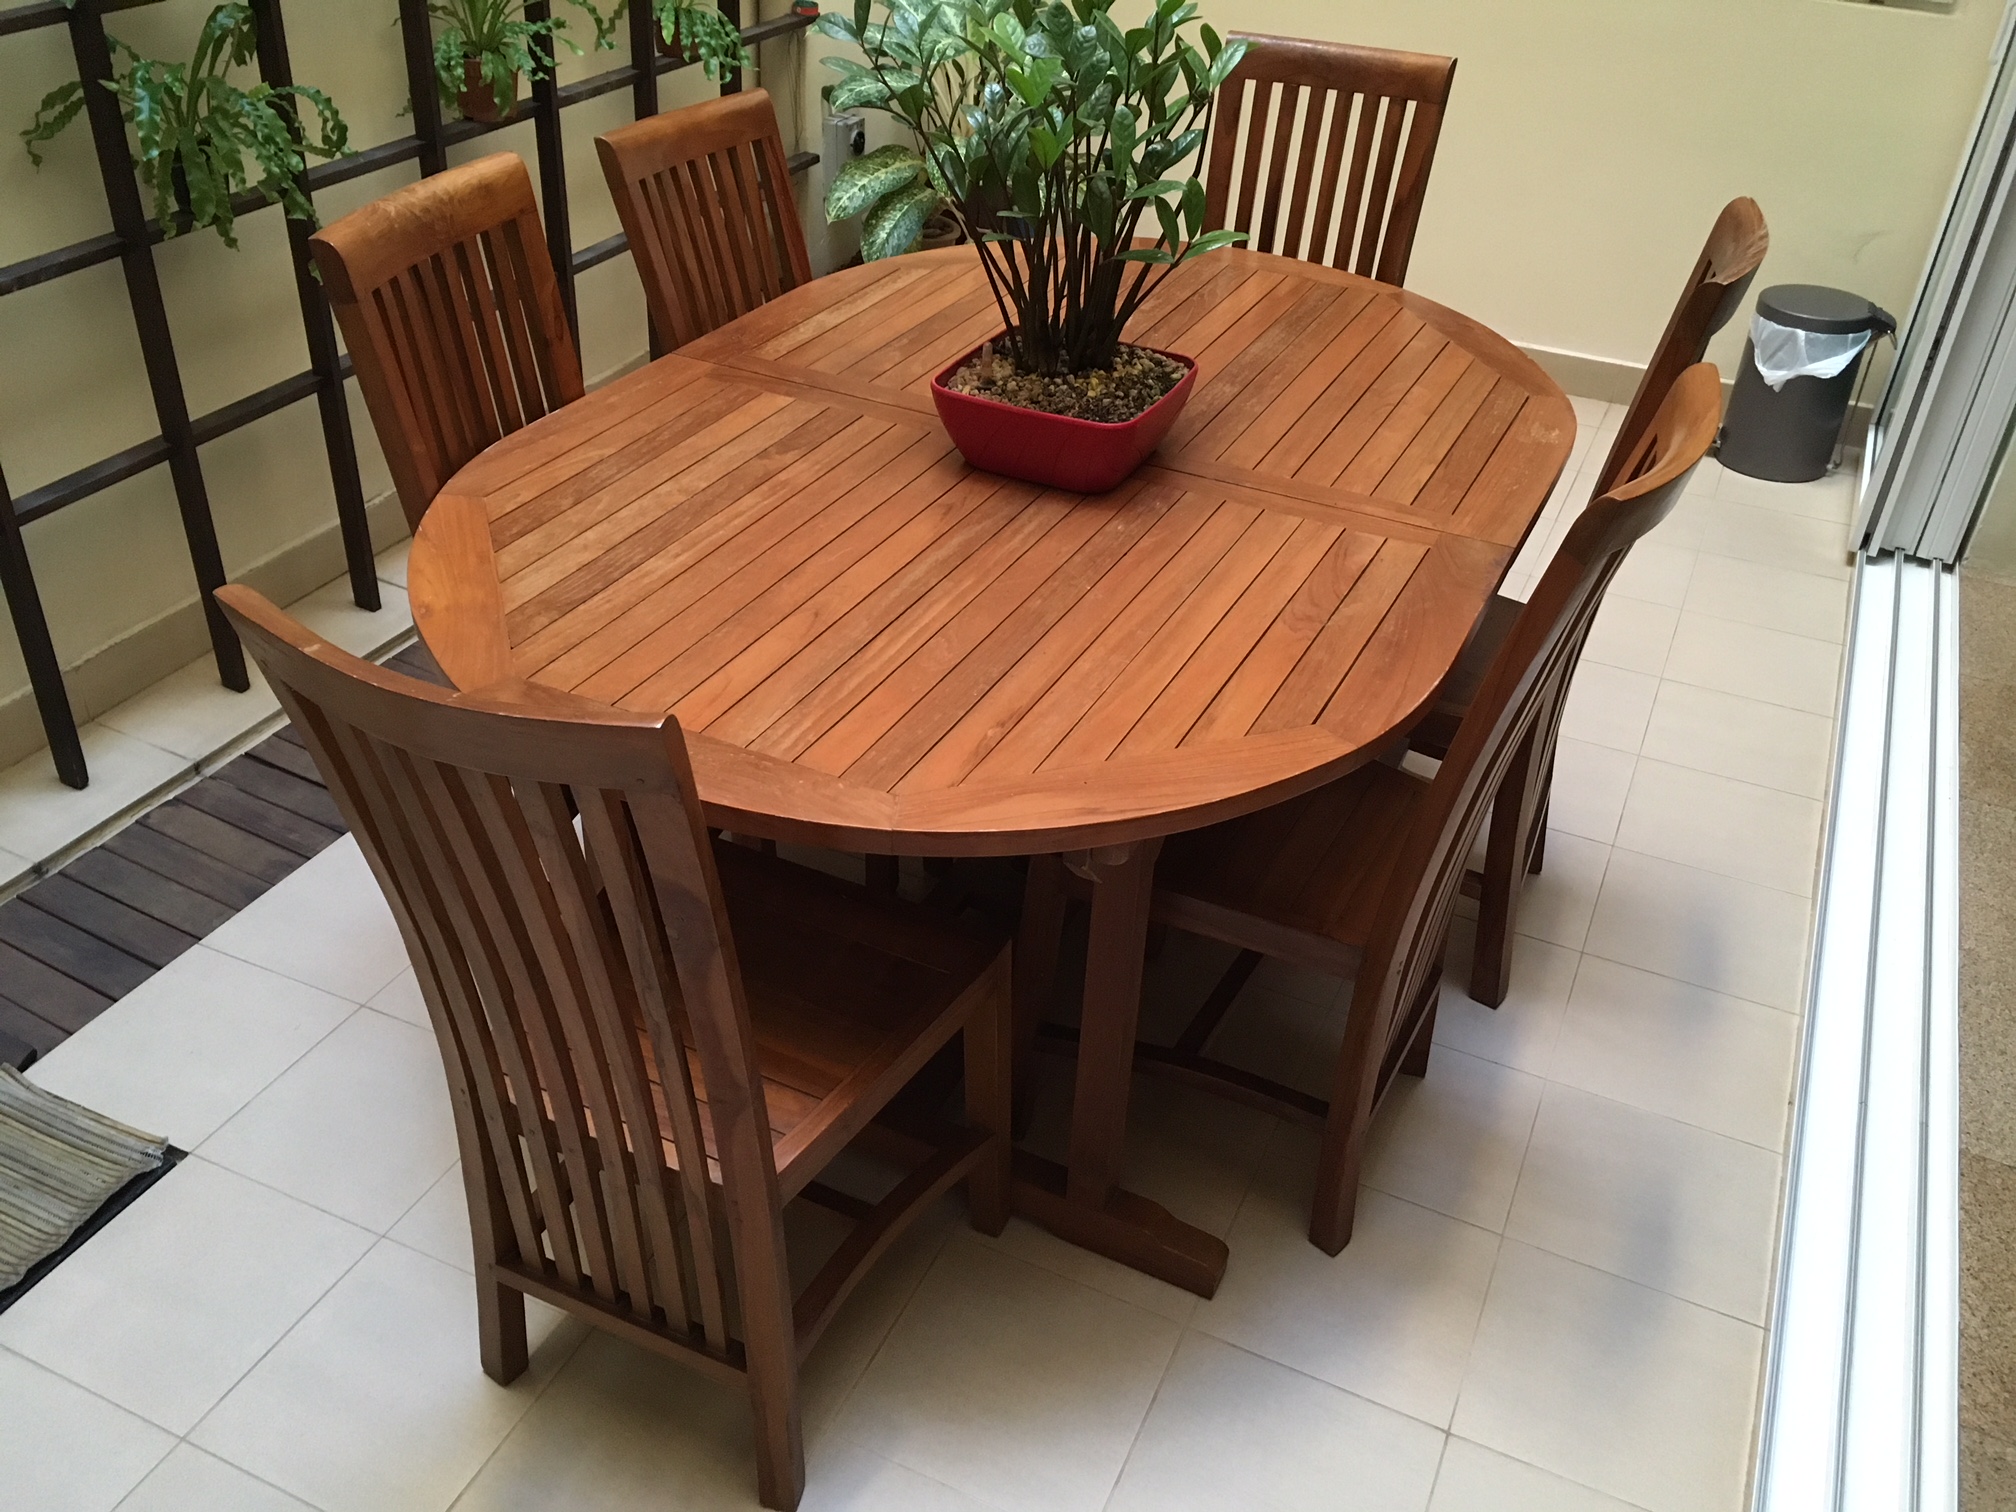 WTS: Used Wooden Teak Extendable Dining Table & 6 Chairs - Want-to-Sell